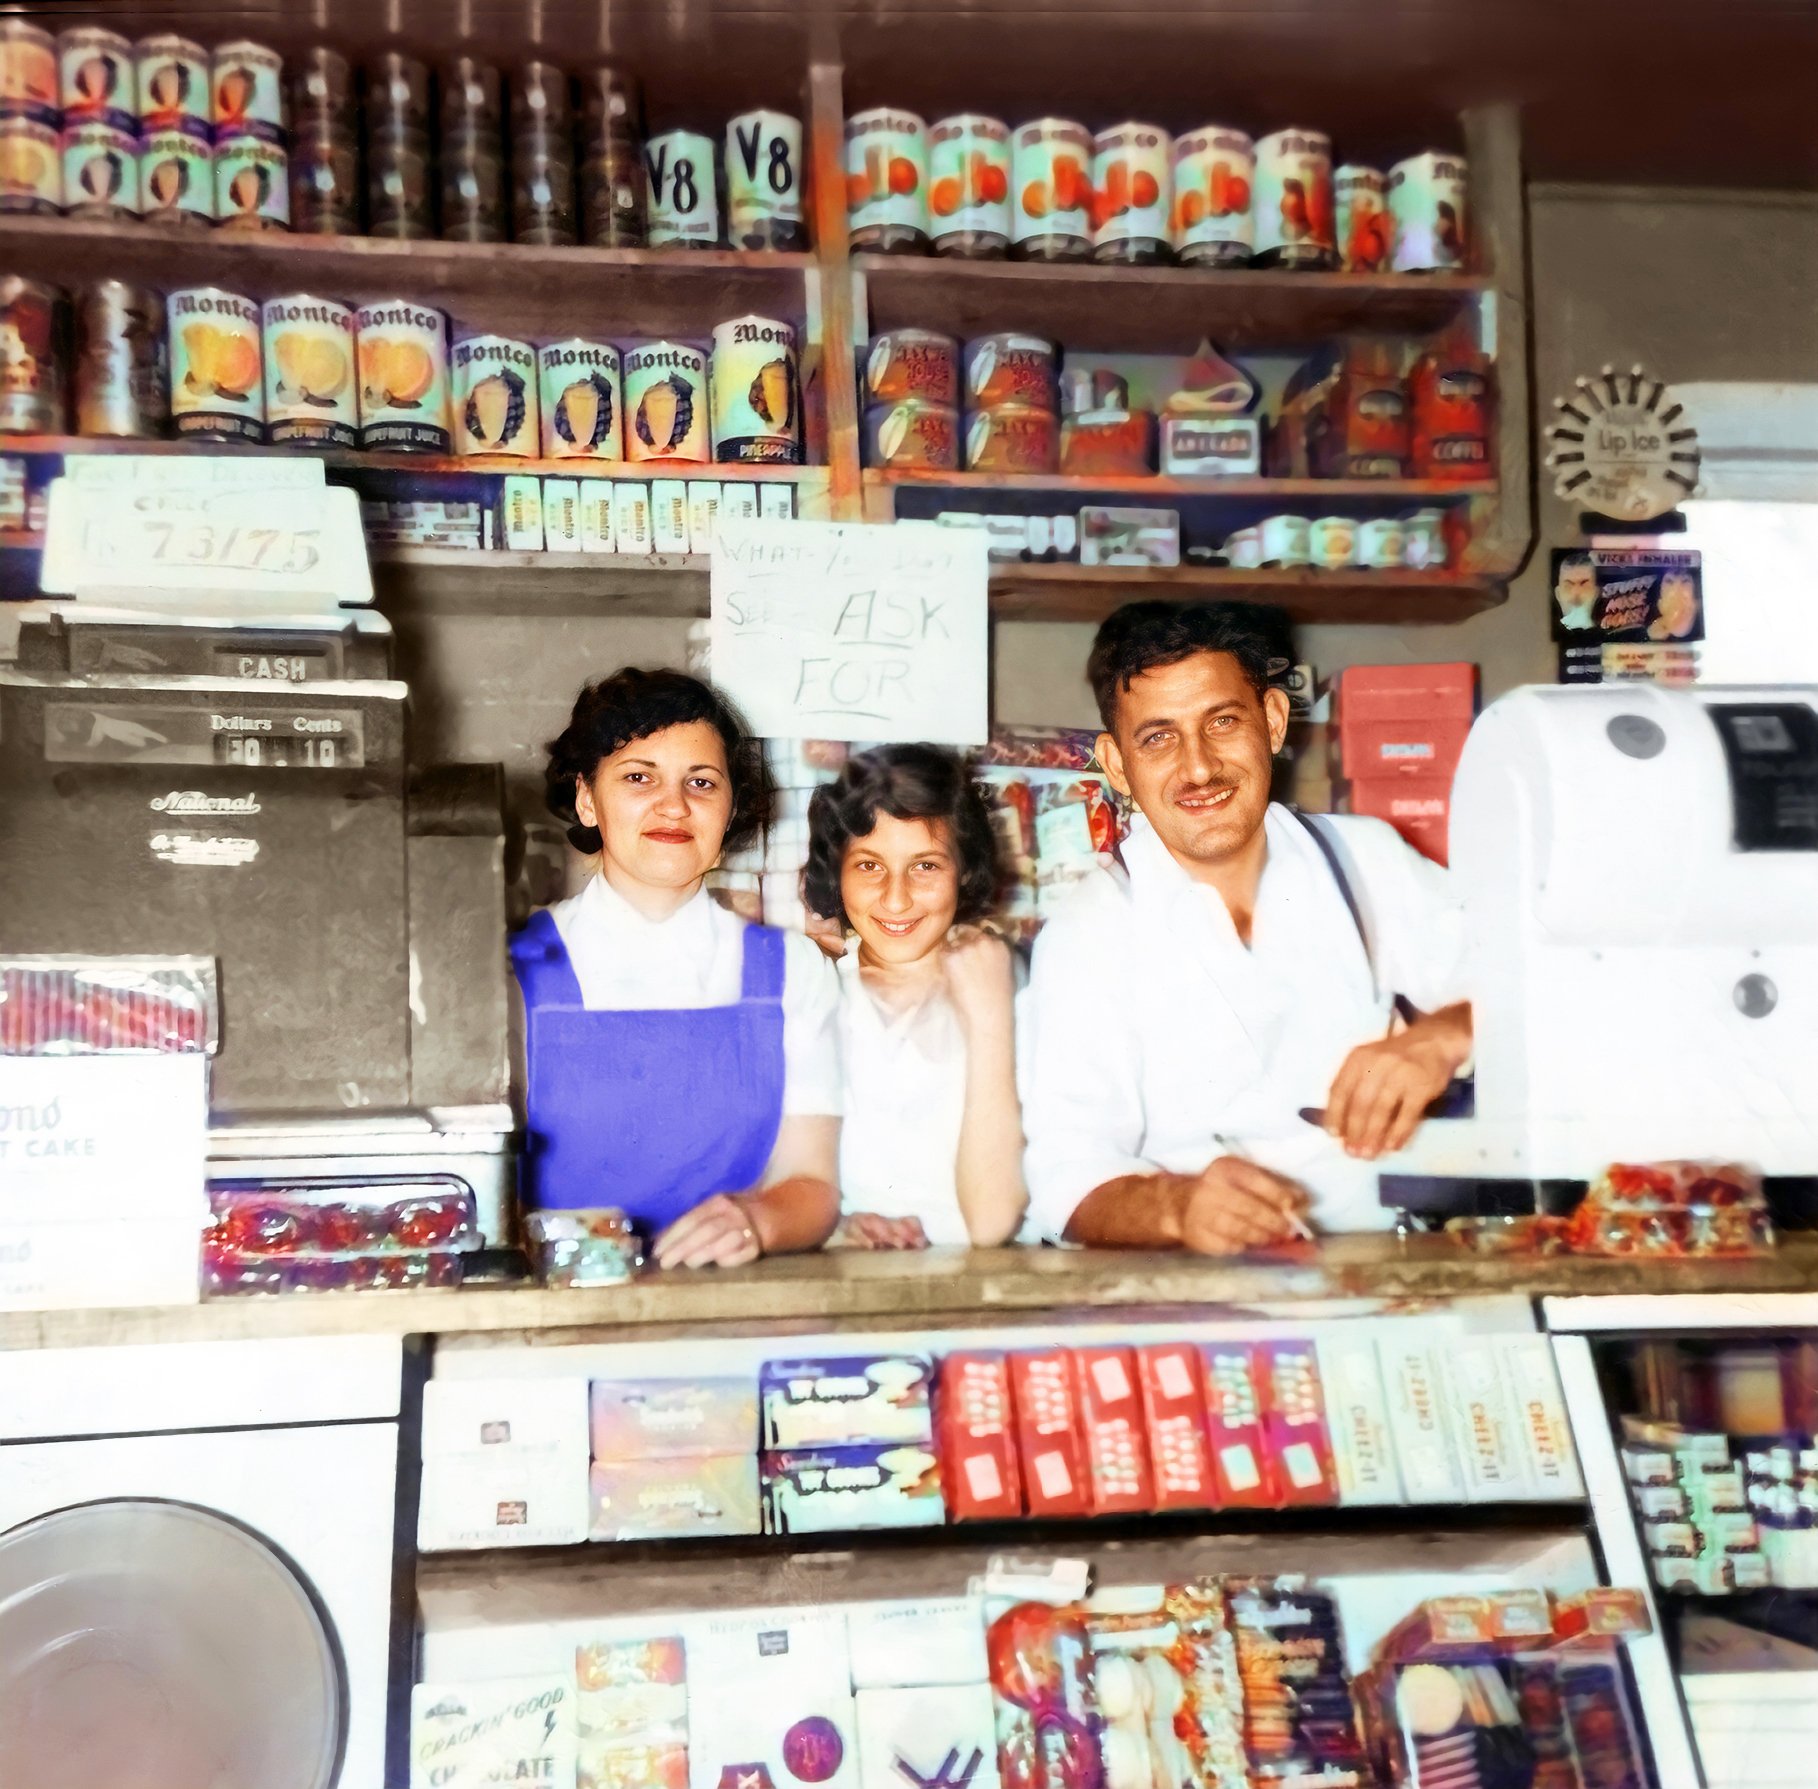 Their first year of operation – Jennie, Marie and Sam behind the counter. Take note of the sign hanging behind them: “What you don’t see ask for.”